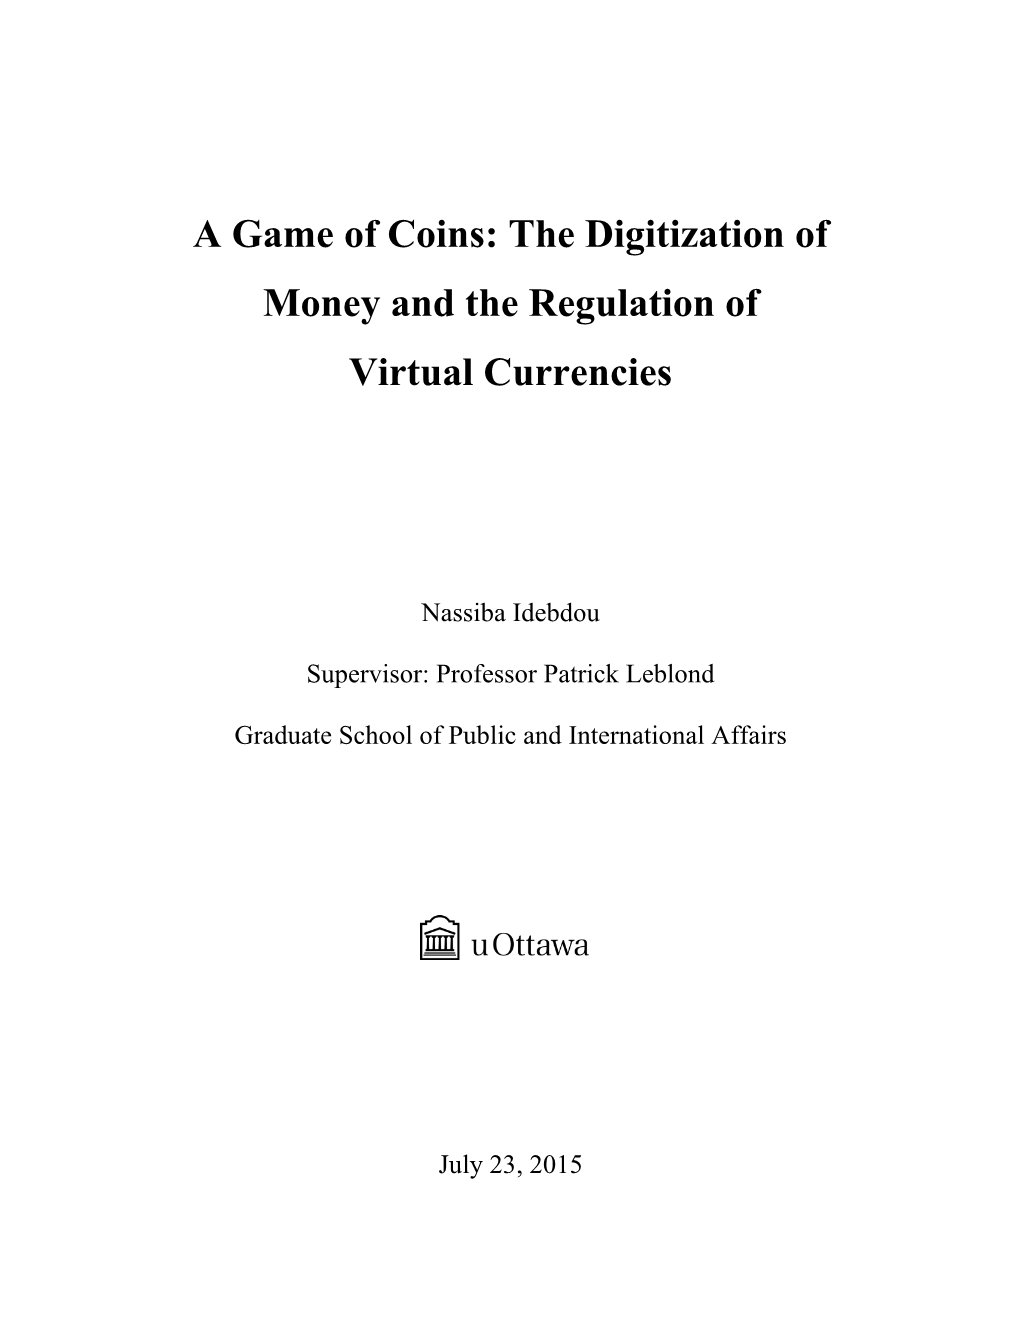 The Digitization of Money and the Regulation of Virtual Currencies